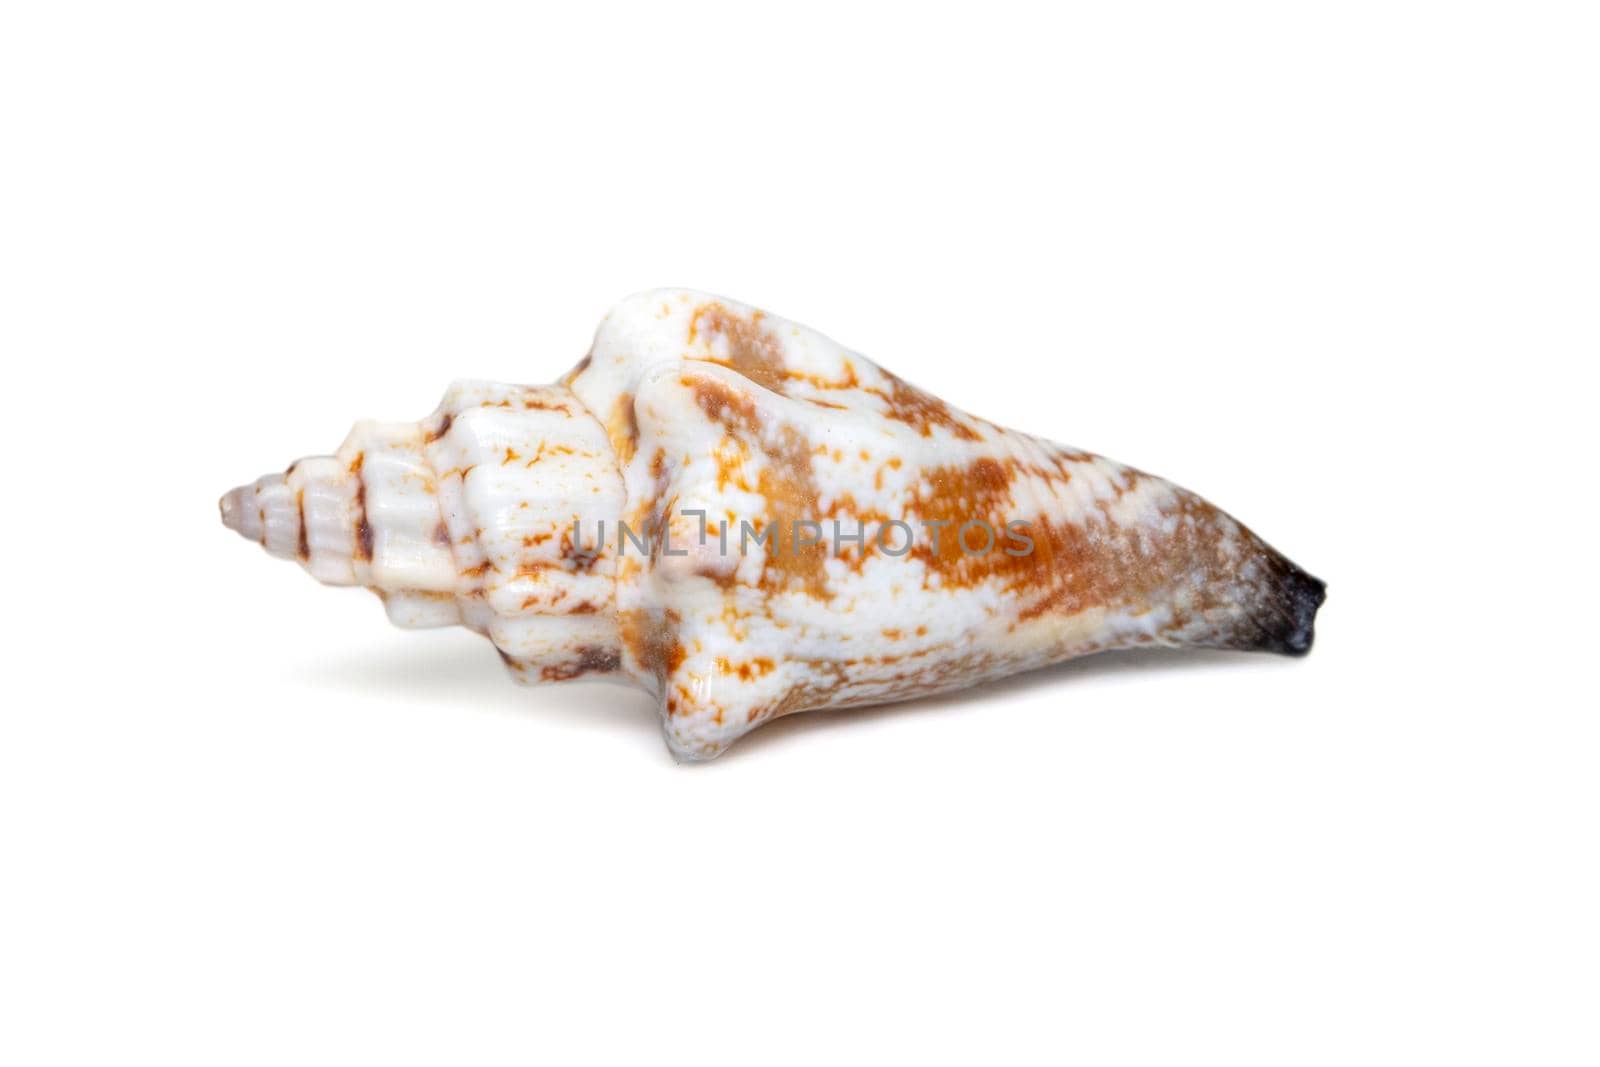 Image of canarium urceus is a species of sea snail, a marine gastropod mollusk in the family strombidae, the true conchs on a white background. Red Sea Snail. Undersea Animals. Sea Shells.